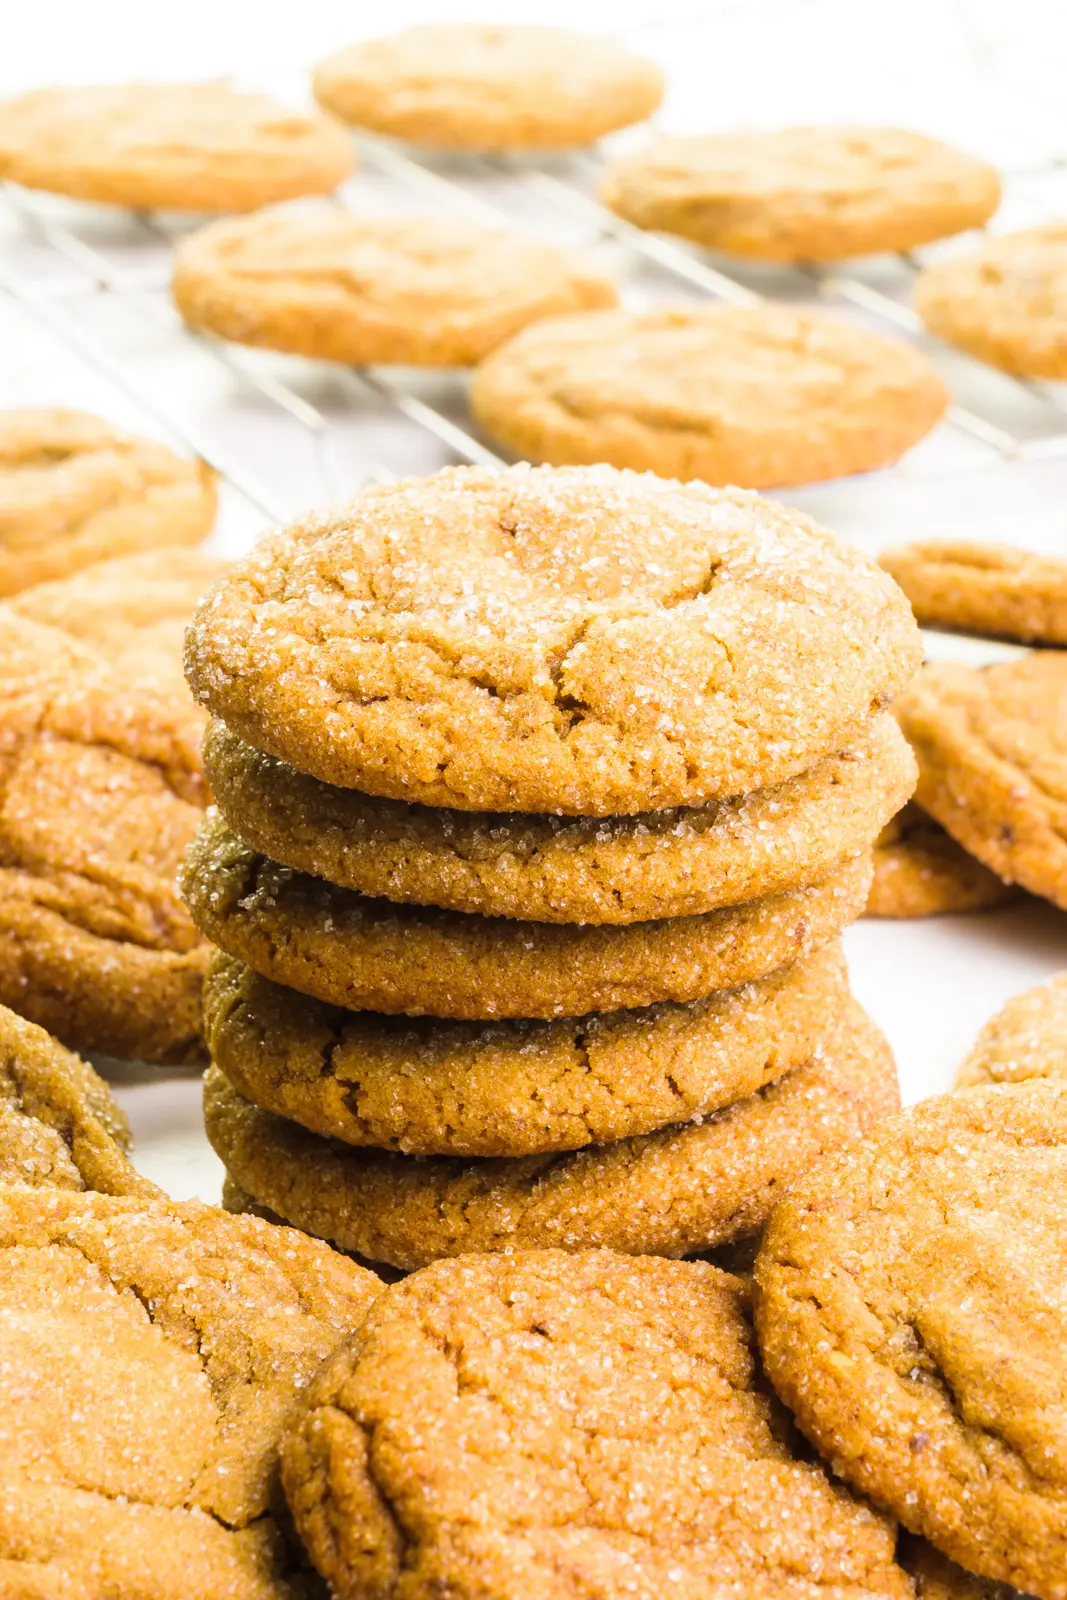 A stack of vegan spice cookies. There are more cookies in front and behind the stack.